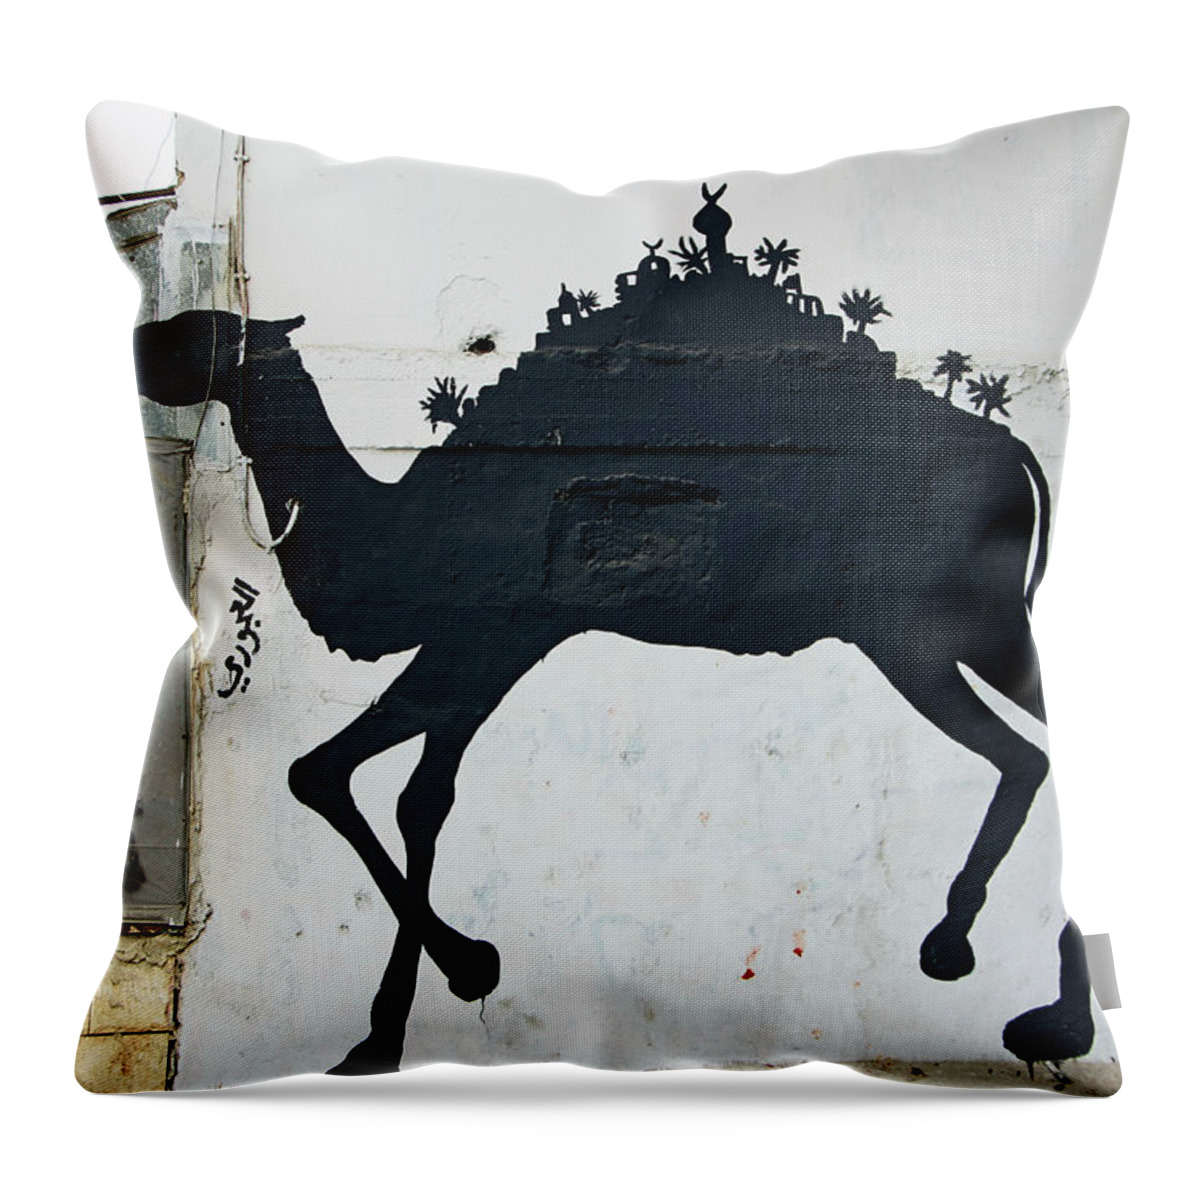 Refugee Camp Throw Pillow featuring the photograph The Refugee Camp Camel by Munir Alawi